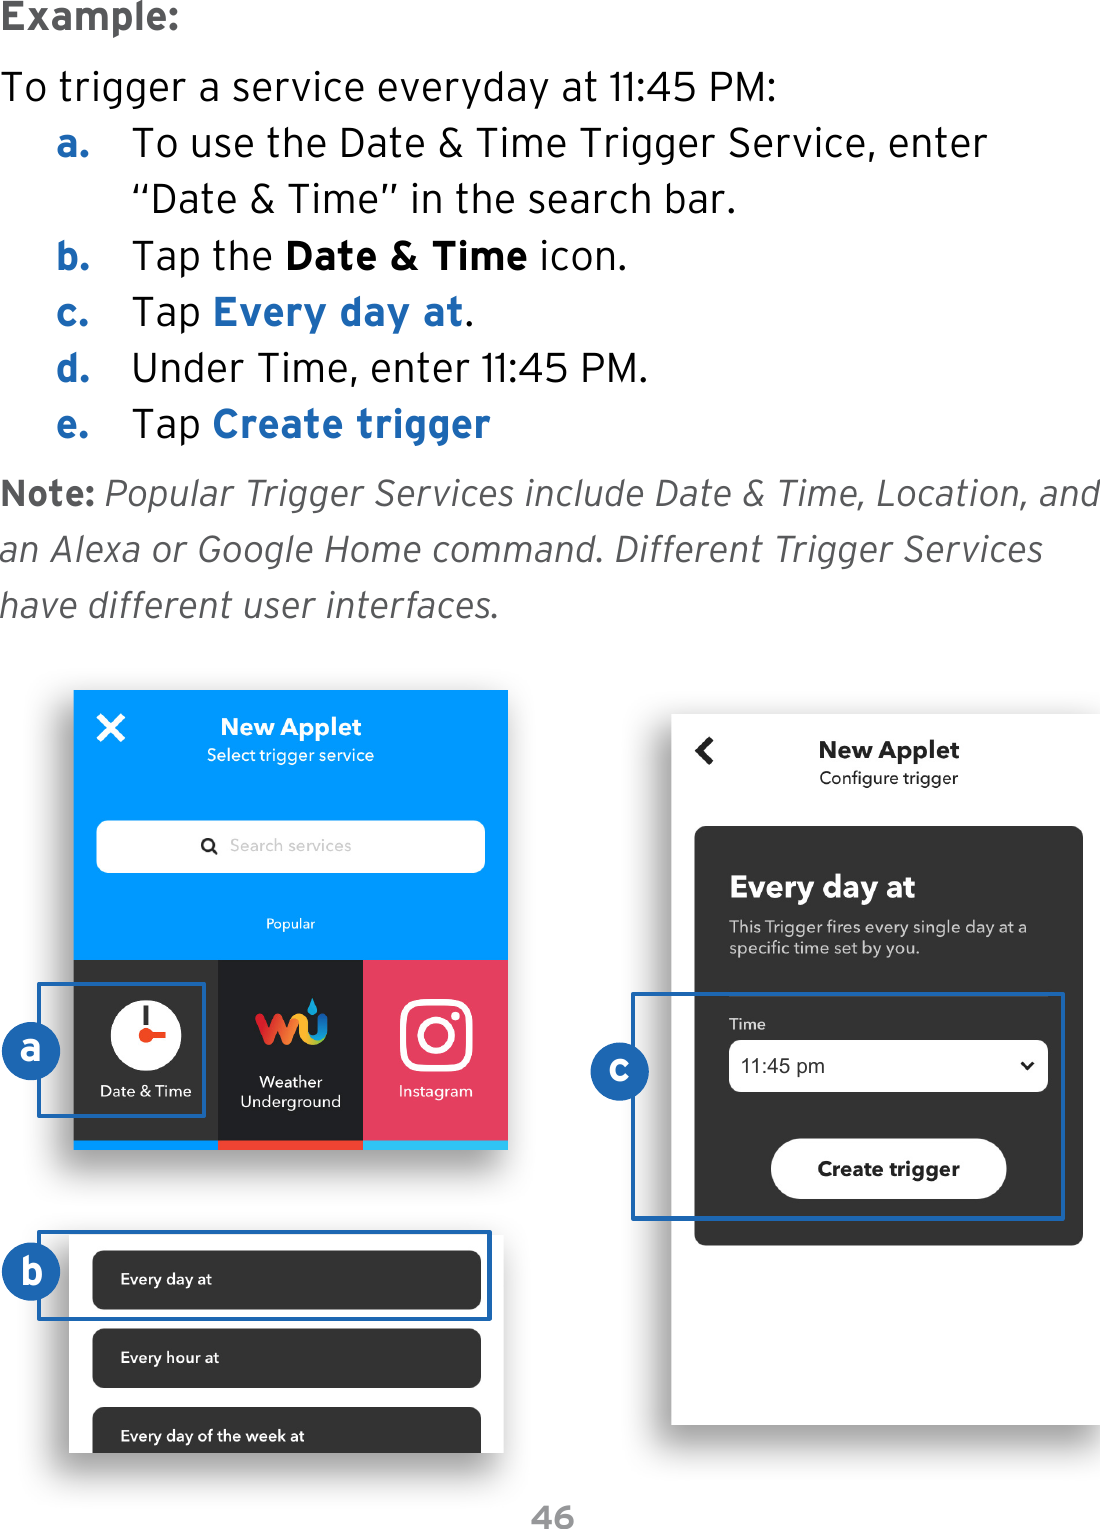 46To trigger a service everyday at 11:45 PM:a.  To use the Date &amp; Time Trigger Service, enter “Date &amp; Time” in the search bar.b.  Tap the Date &amp; Time icon.c.  Tap Every day at.d.  Under Time, enter 11:45 PM.e.  Tap Create triggerExample:Note: Popular Trigger Services include Date &amp; Time, Location, and an Alexa or Google Home command. Different Trigger Services have different user interfaces.11:45 pmacb